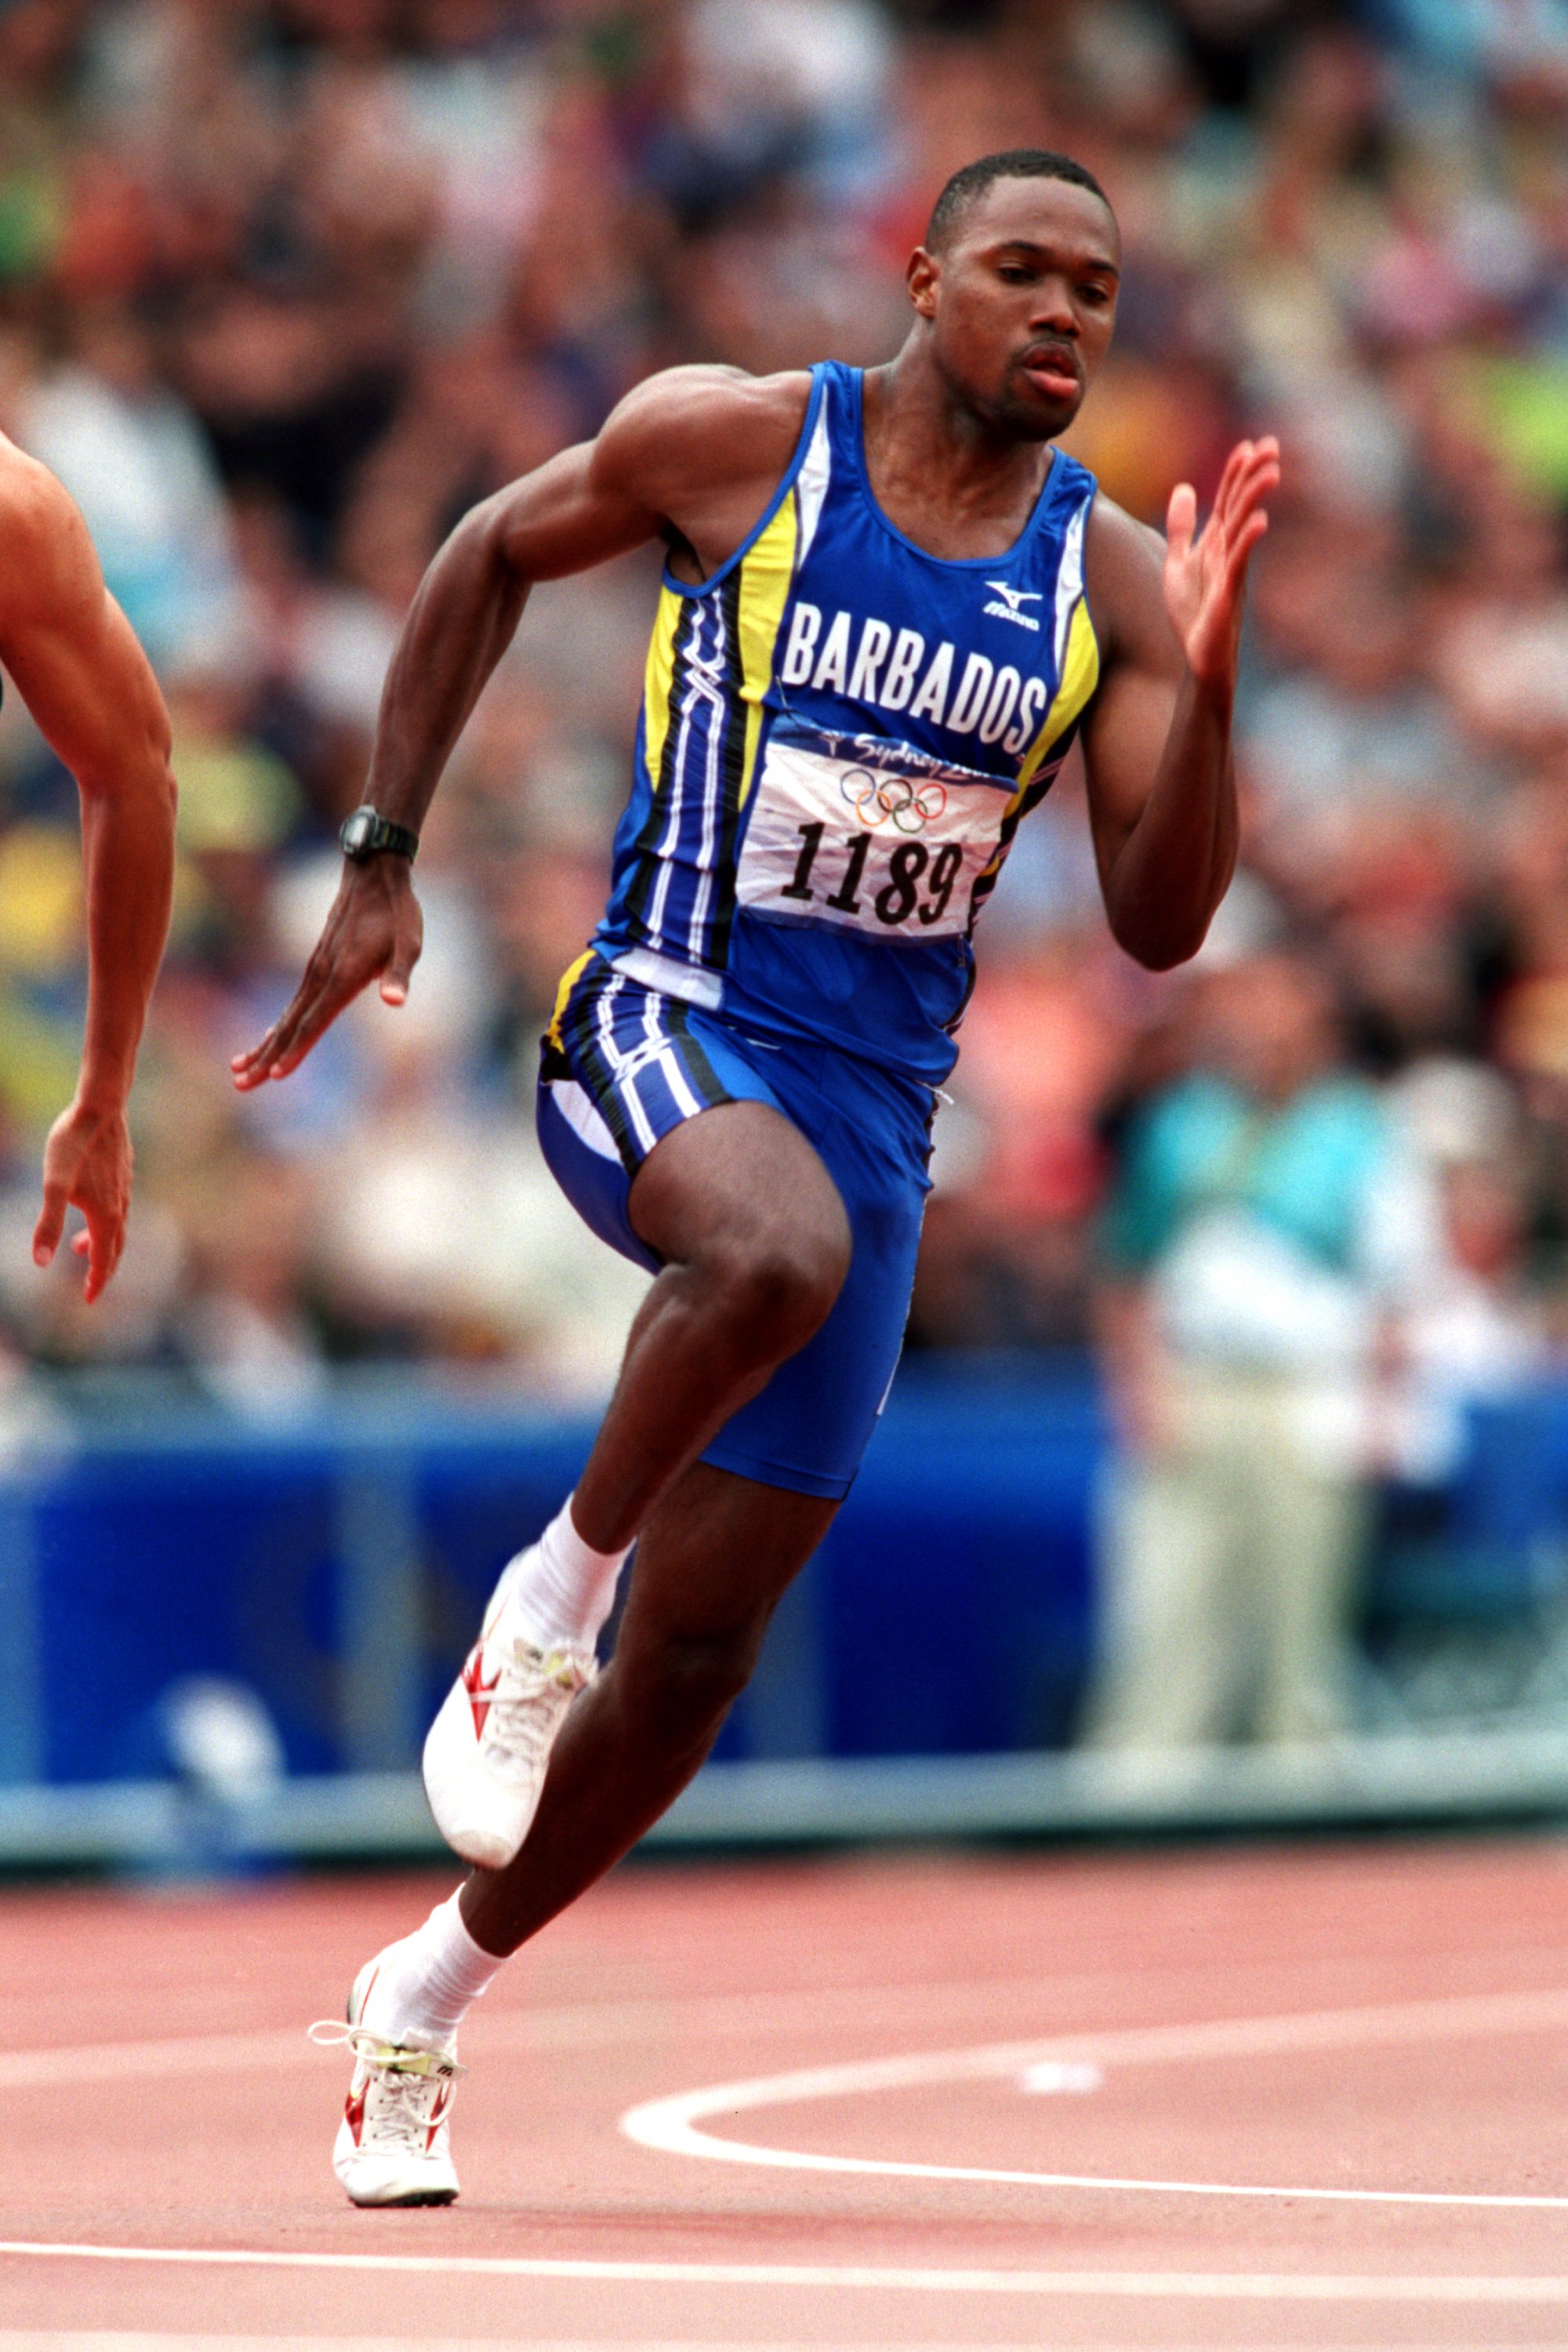 Barbados' Obadele Thompson sprinting to victory at Sydney's 2000 Olympics on September 27, 2000 | Photo: Tony Marshall/EMPICS/Getty Images